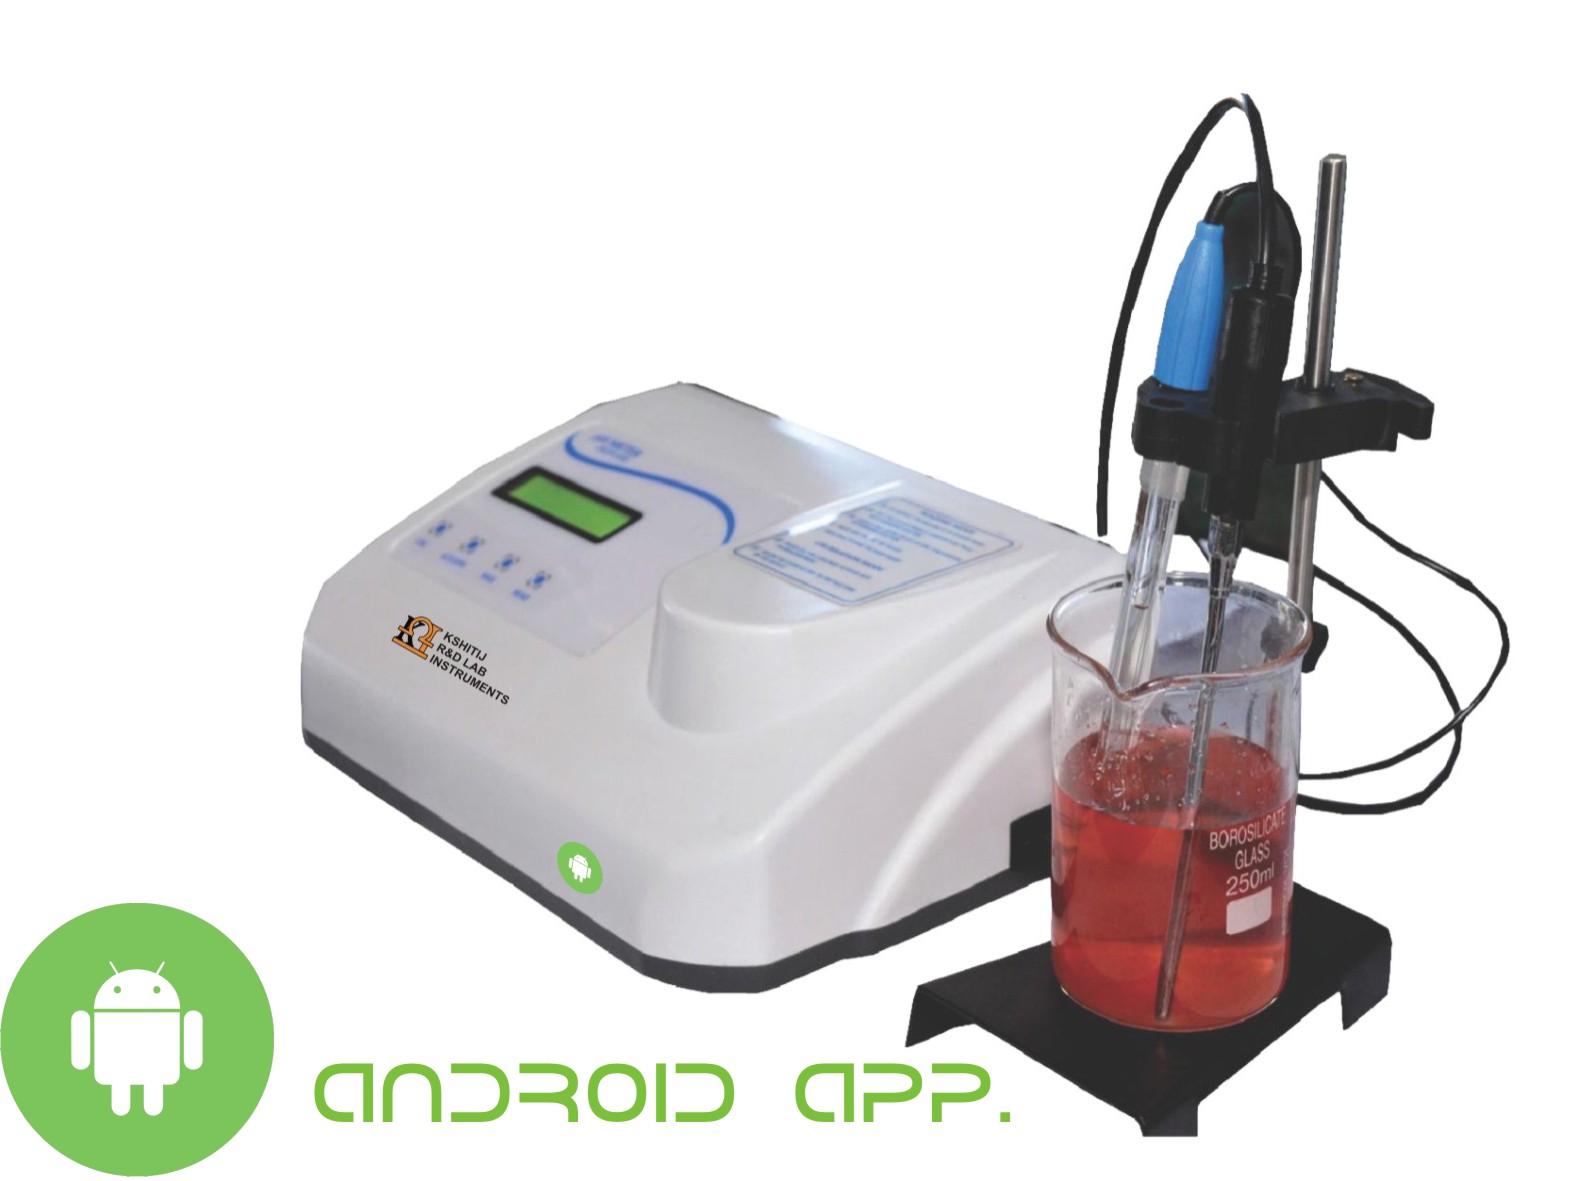 controller/assets/products_upload/ph Meter With ATC ( Android Based), Model No.: KI - 114